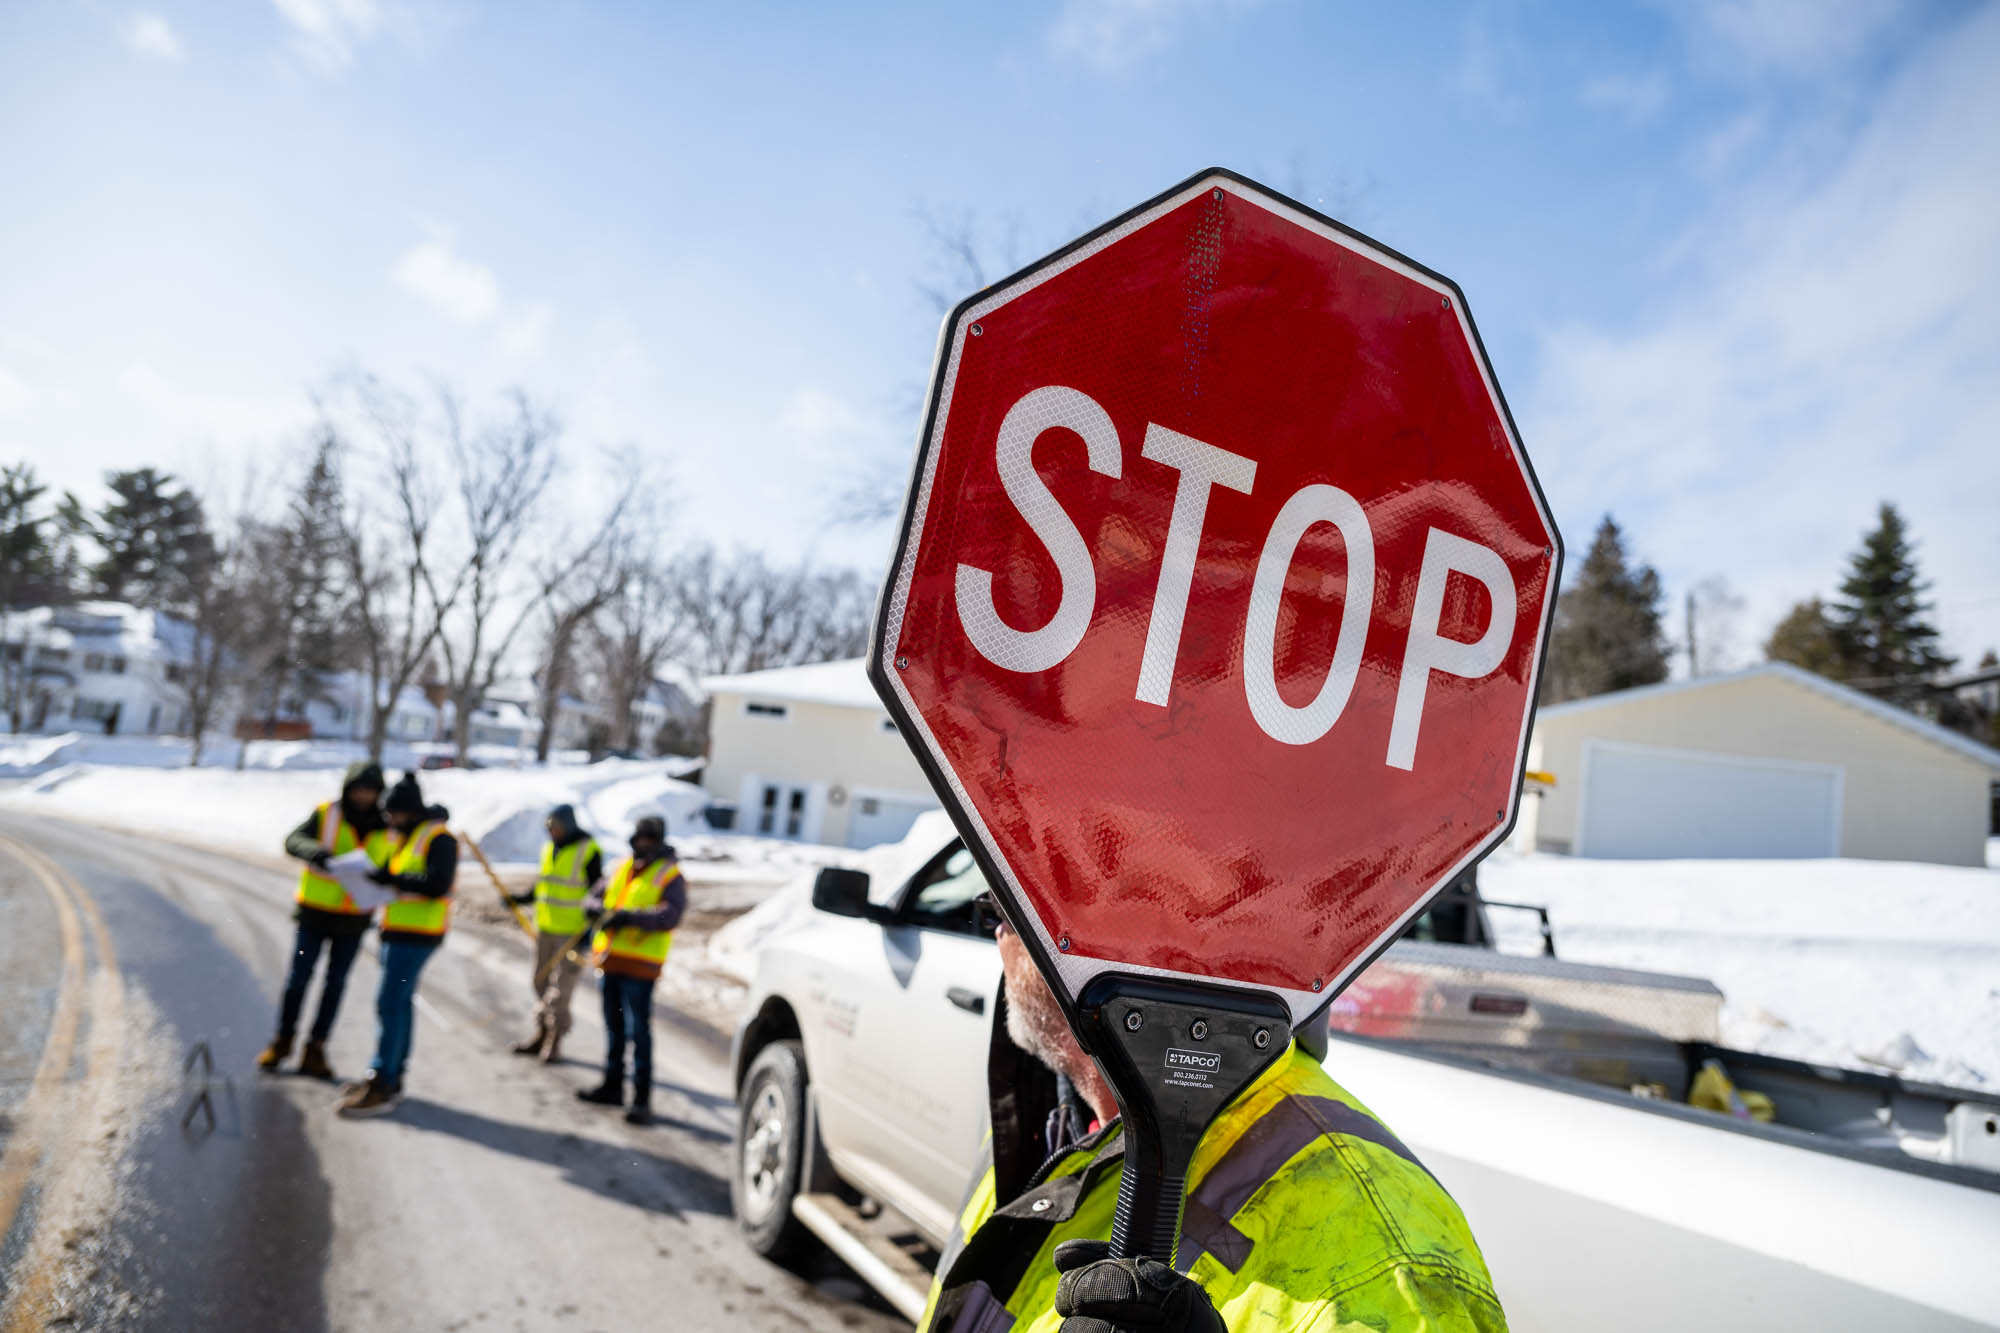 A member of the road testing crew holds a stop sign while others do research in the background on a snowy Duluth street